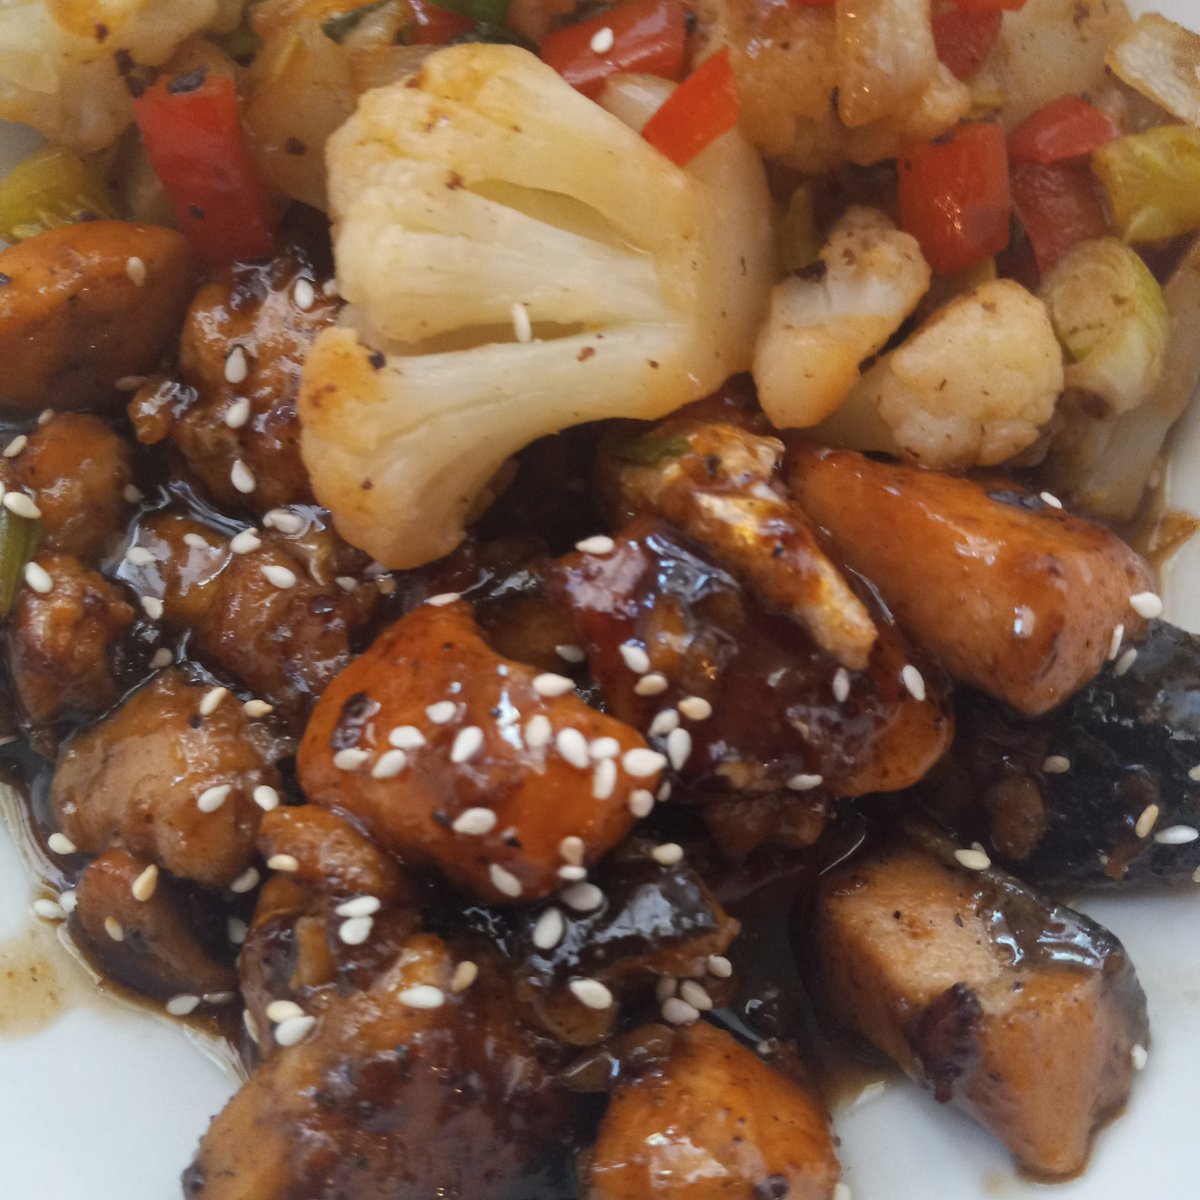 Hey Y'all! For lunch we have 
Sweet Teriyaki Salmon Bites with a Vegetable Medley  (Cauliflower, Red Bell Pepper, Yellow Squash, White Onions, Green Onions, Garlic, Lime & Key Lime Zest) 
#cajungurlwithasianflavor
#eatprettyfood
#nowthatsyum
#forksandknivesapproved #salmonbites